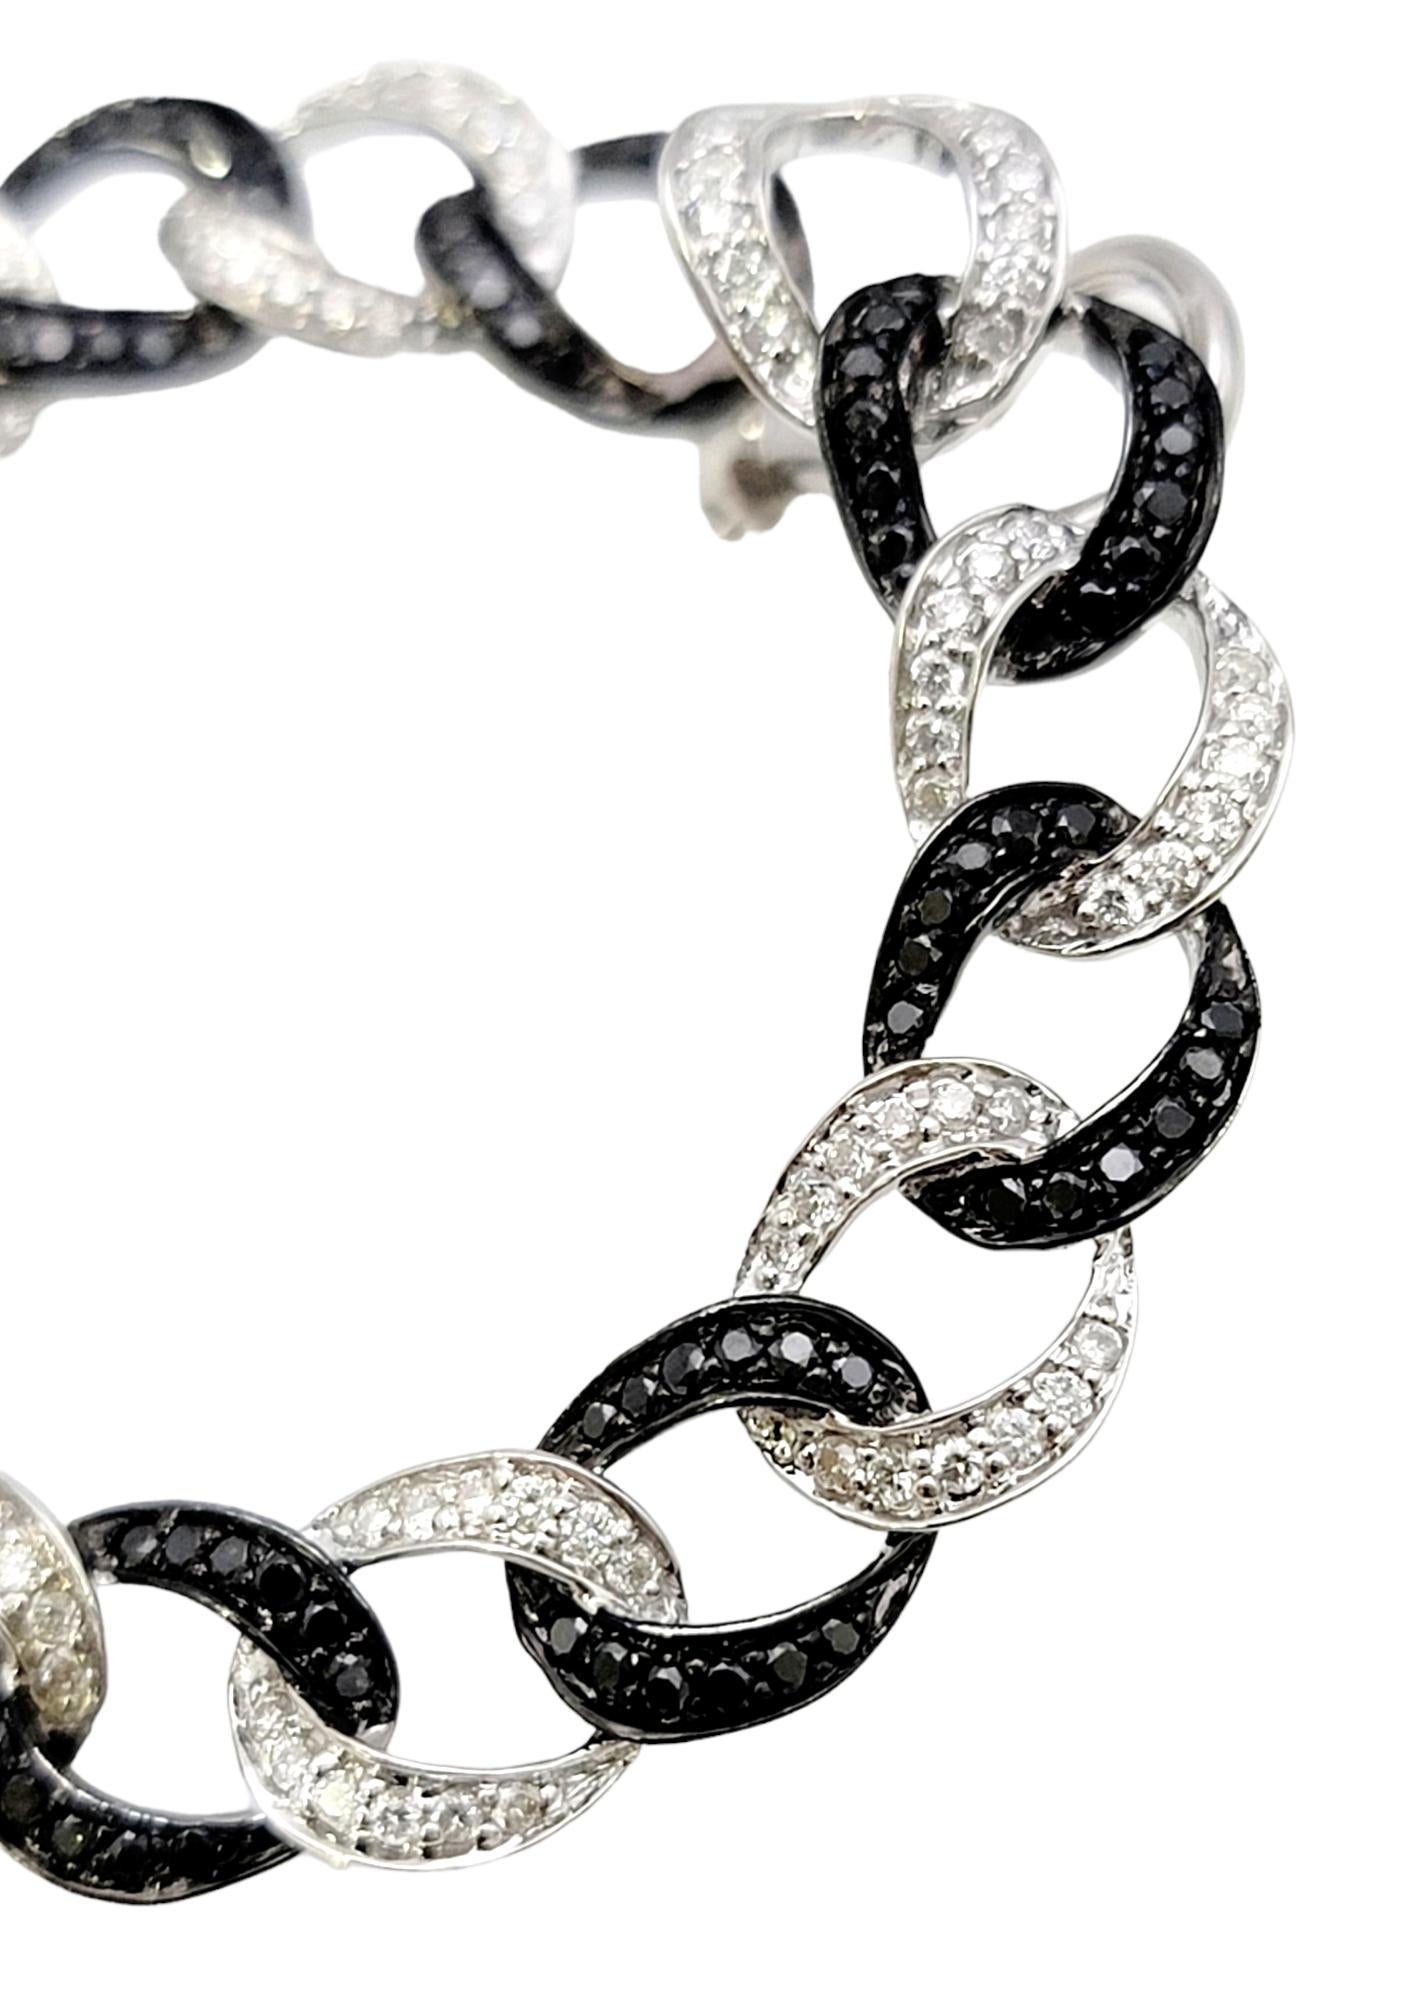 If you are looking for dazzling sparkle from every angle, these stunning pave diamond hoop earrings will not disappoint! With the unique black and white diamond detailing, the classic hoop design gets a modernized look with a sophisticated feel.